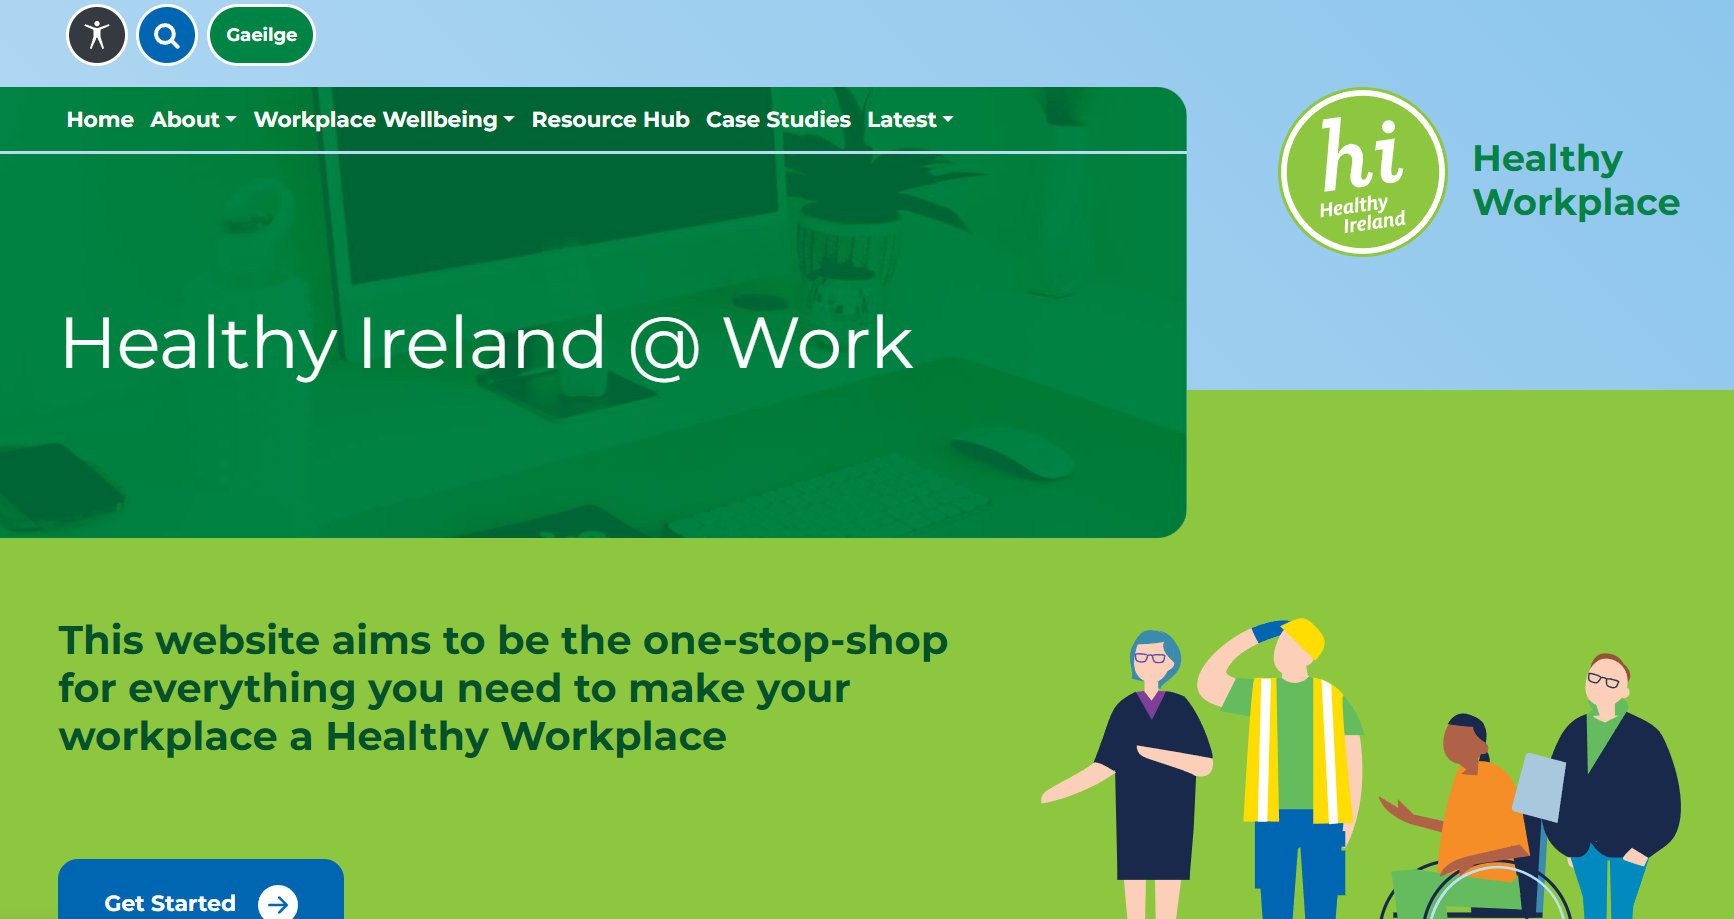 SME CONSULTATION ON EXPANDING HEALTHY IRELAND @ WORK WEBSITE